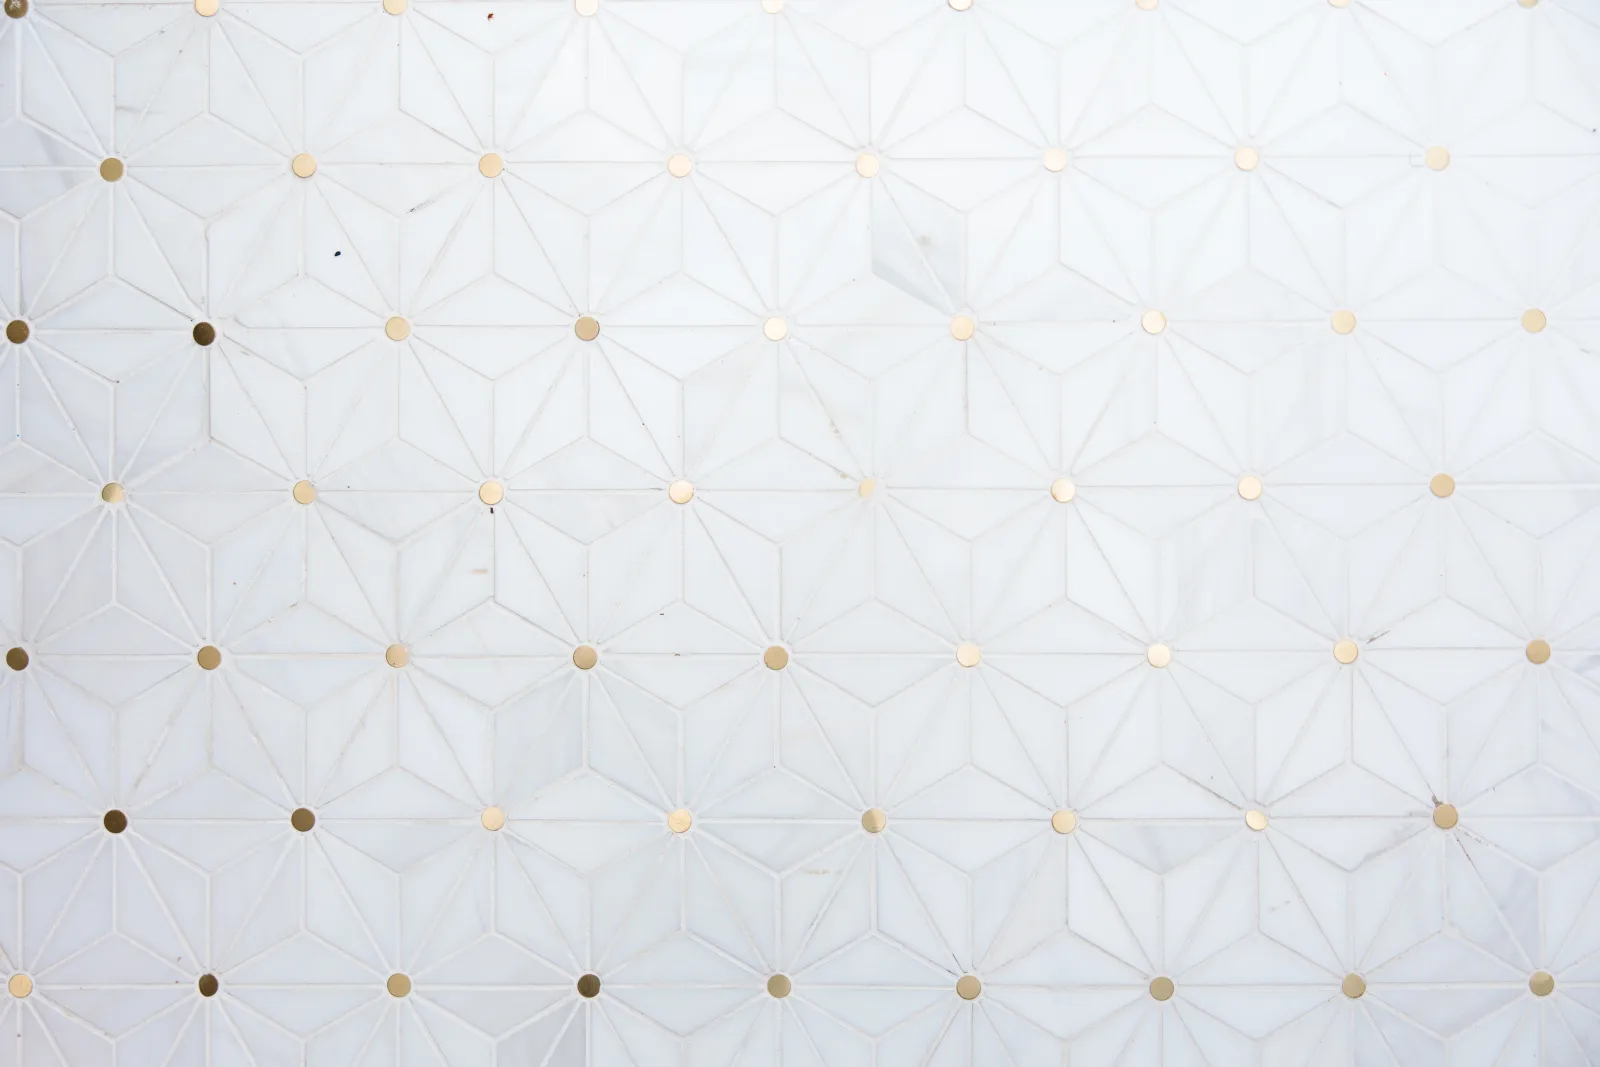 close up of a pretty porcelain tile floor with gold circles in the center of flower box design